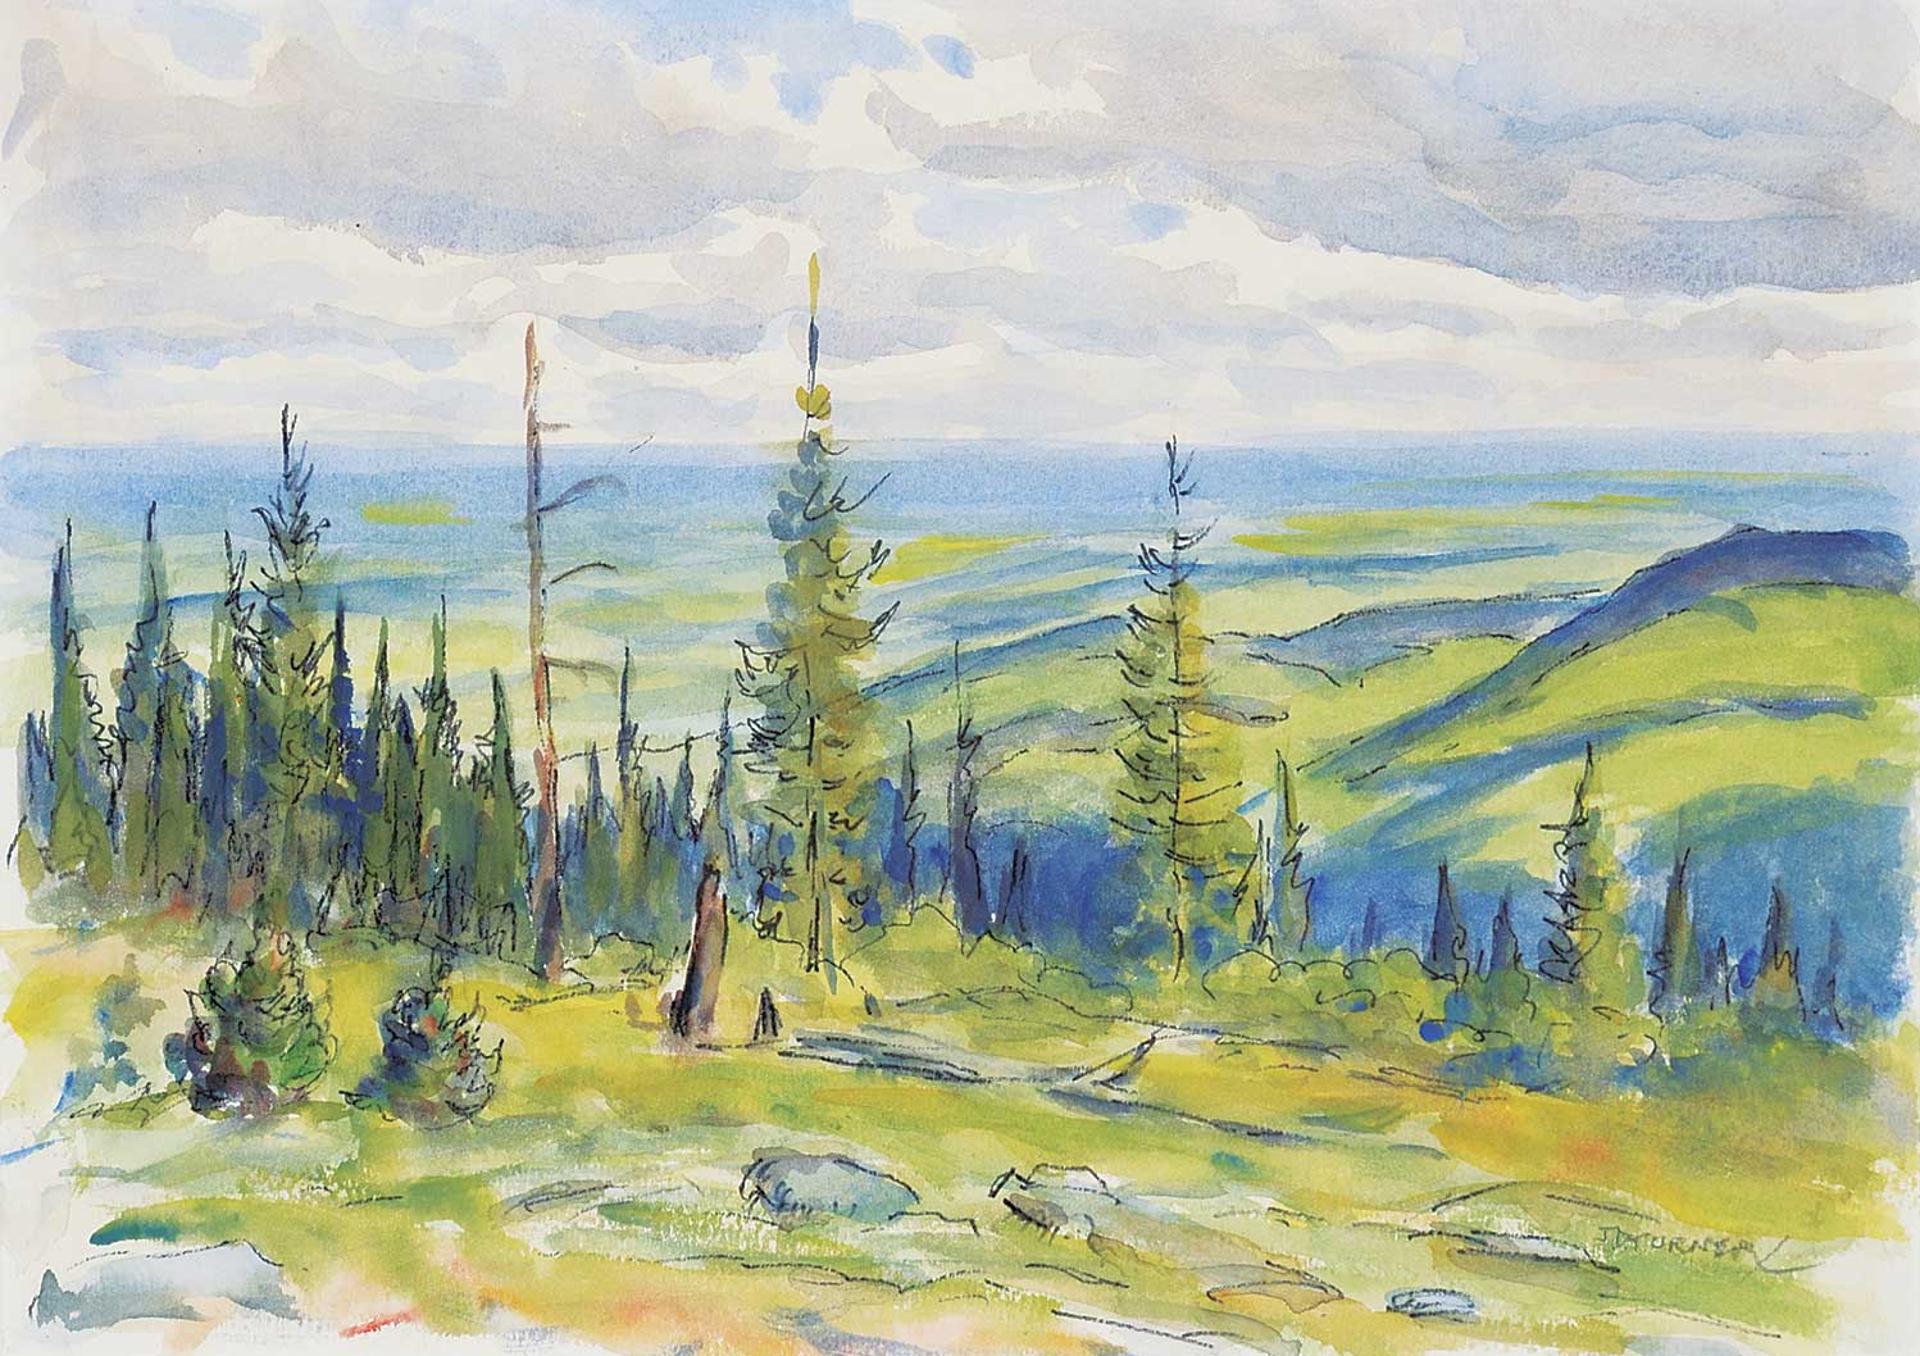 John Davenall Turner (1900-1980) - Sketch from the Skyline Trail, Looking East, Porcupine Hills